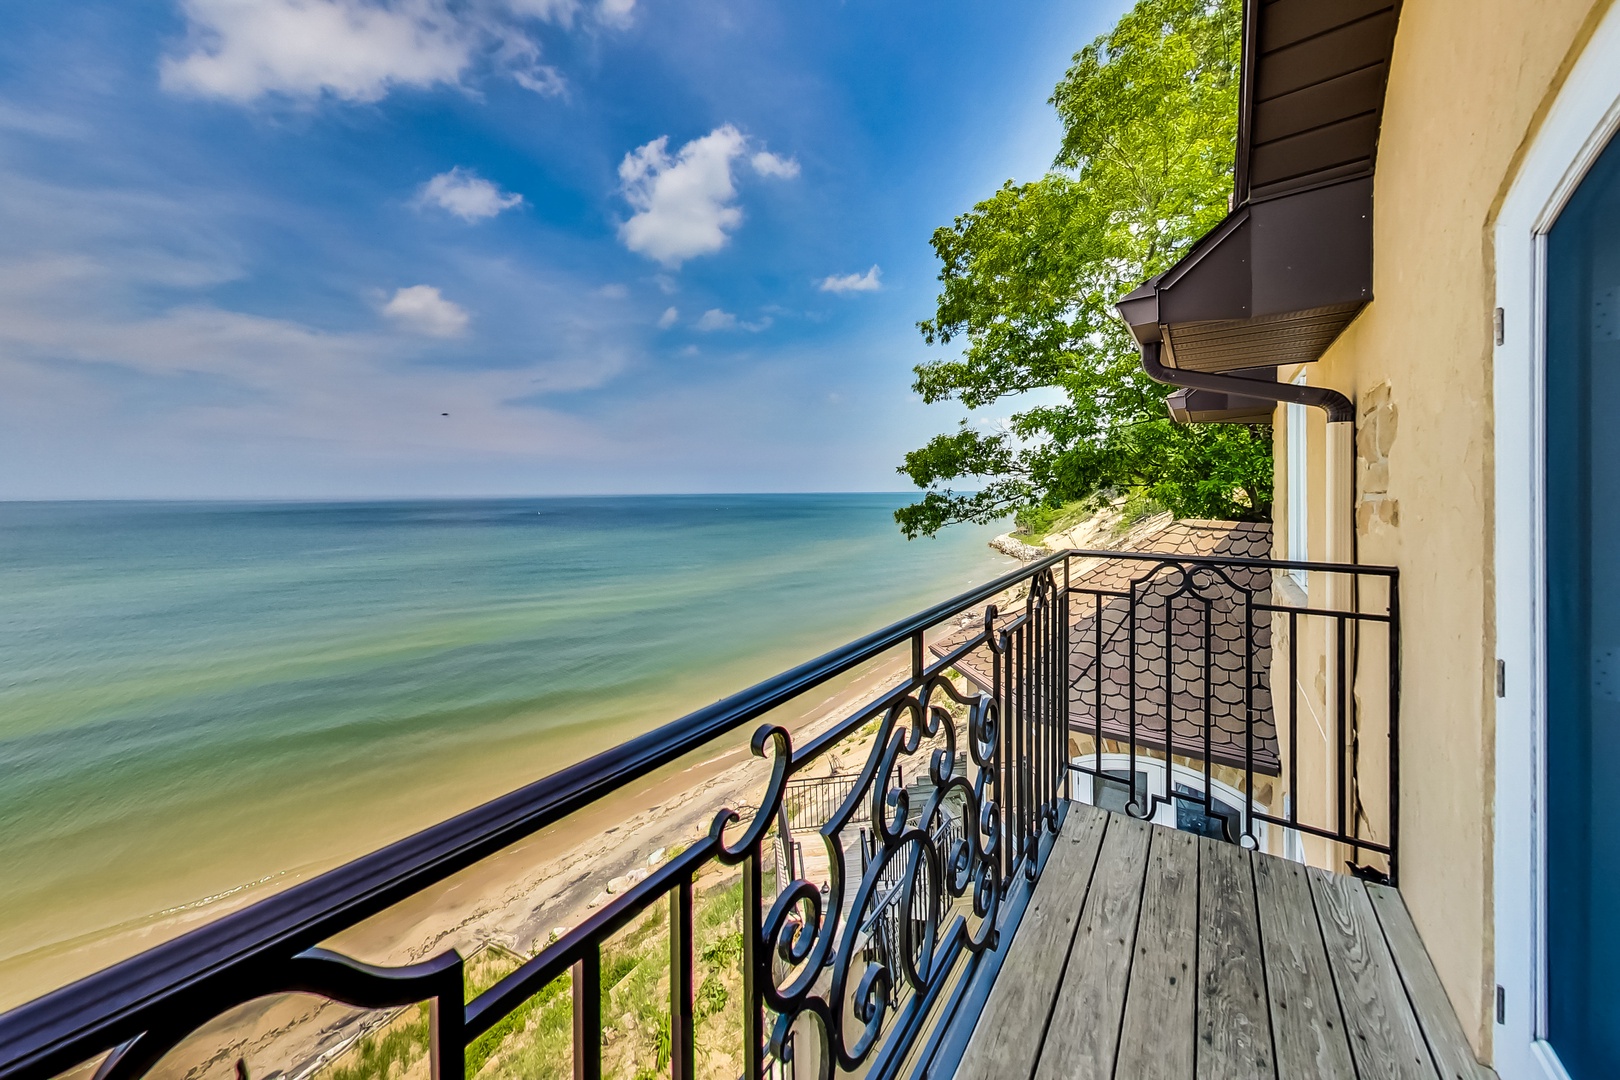 The views of Lake Michigan are incredible, including from this cool balcony.